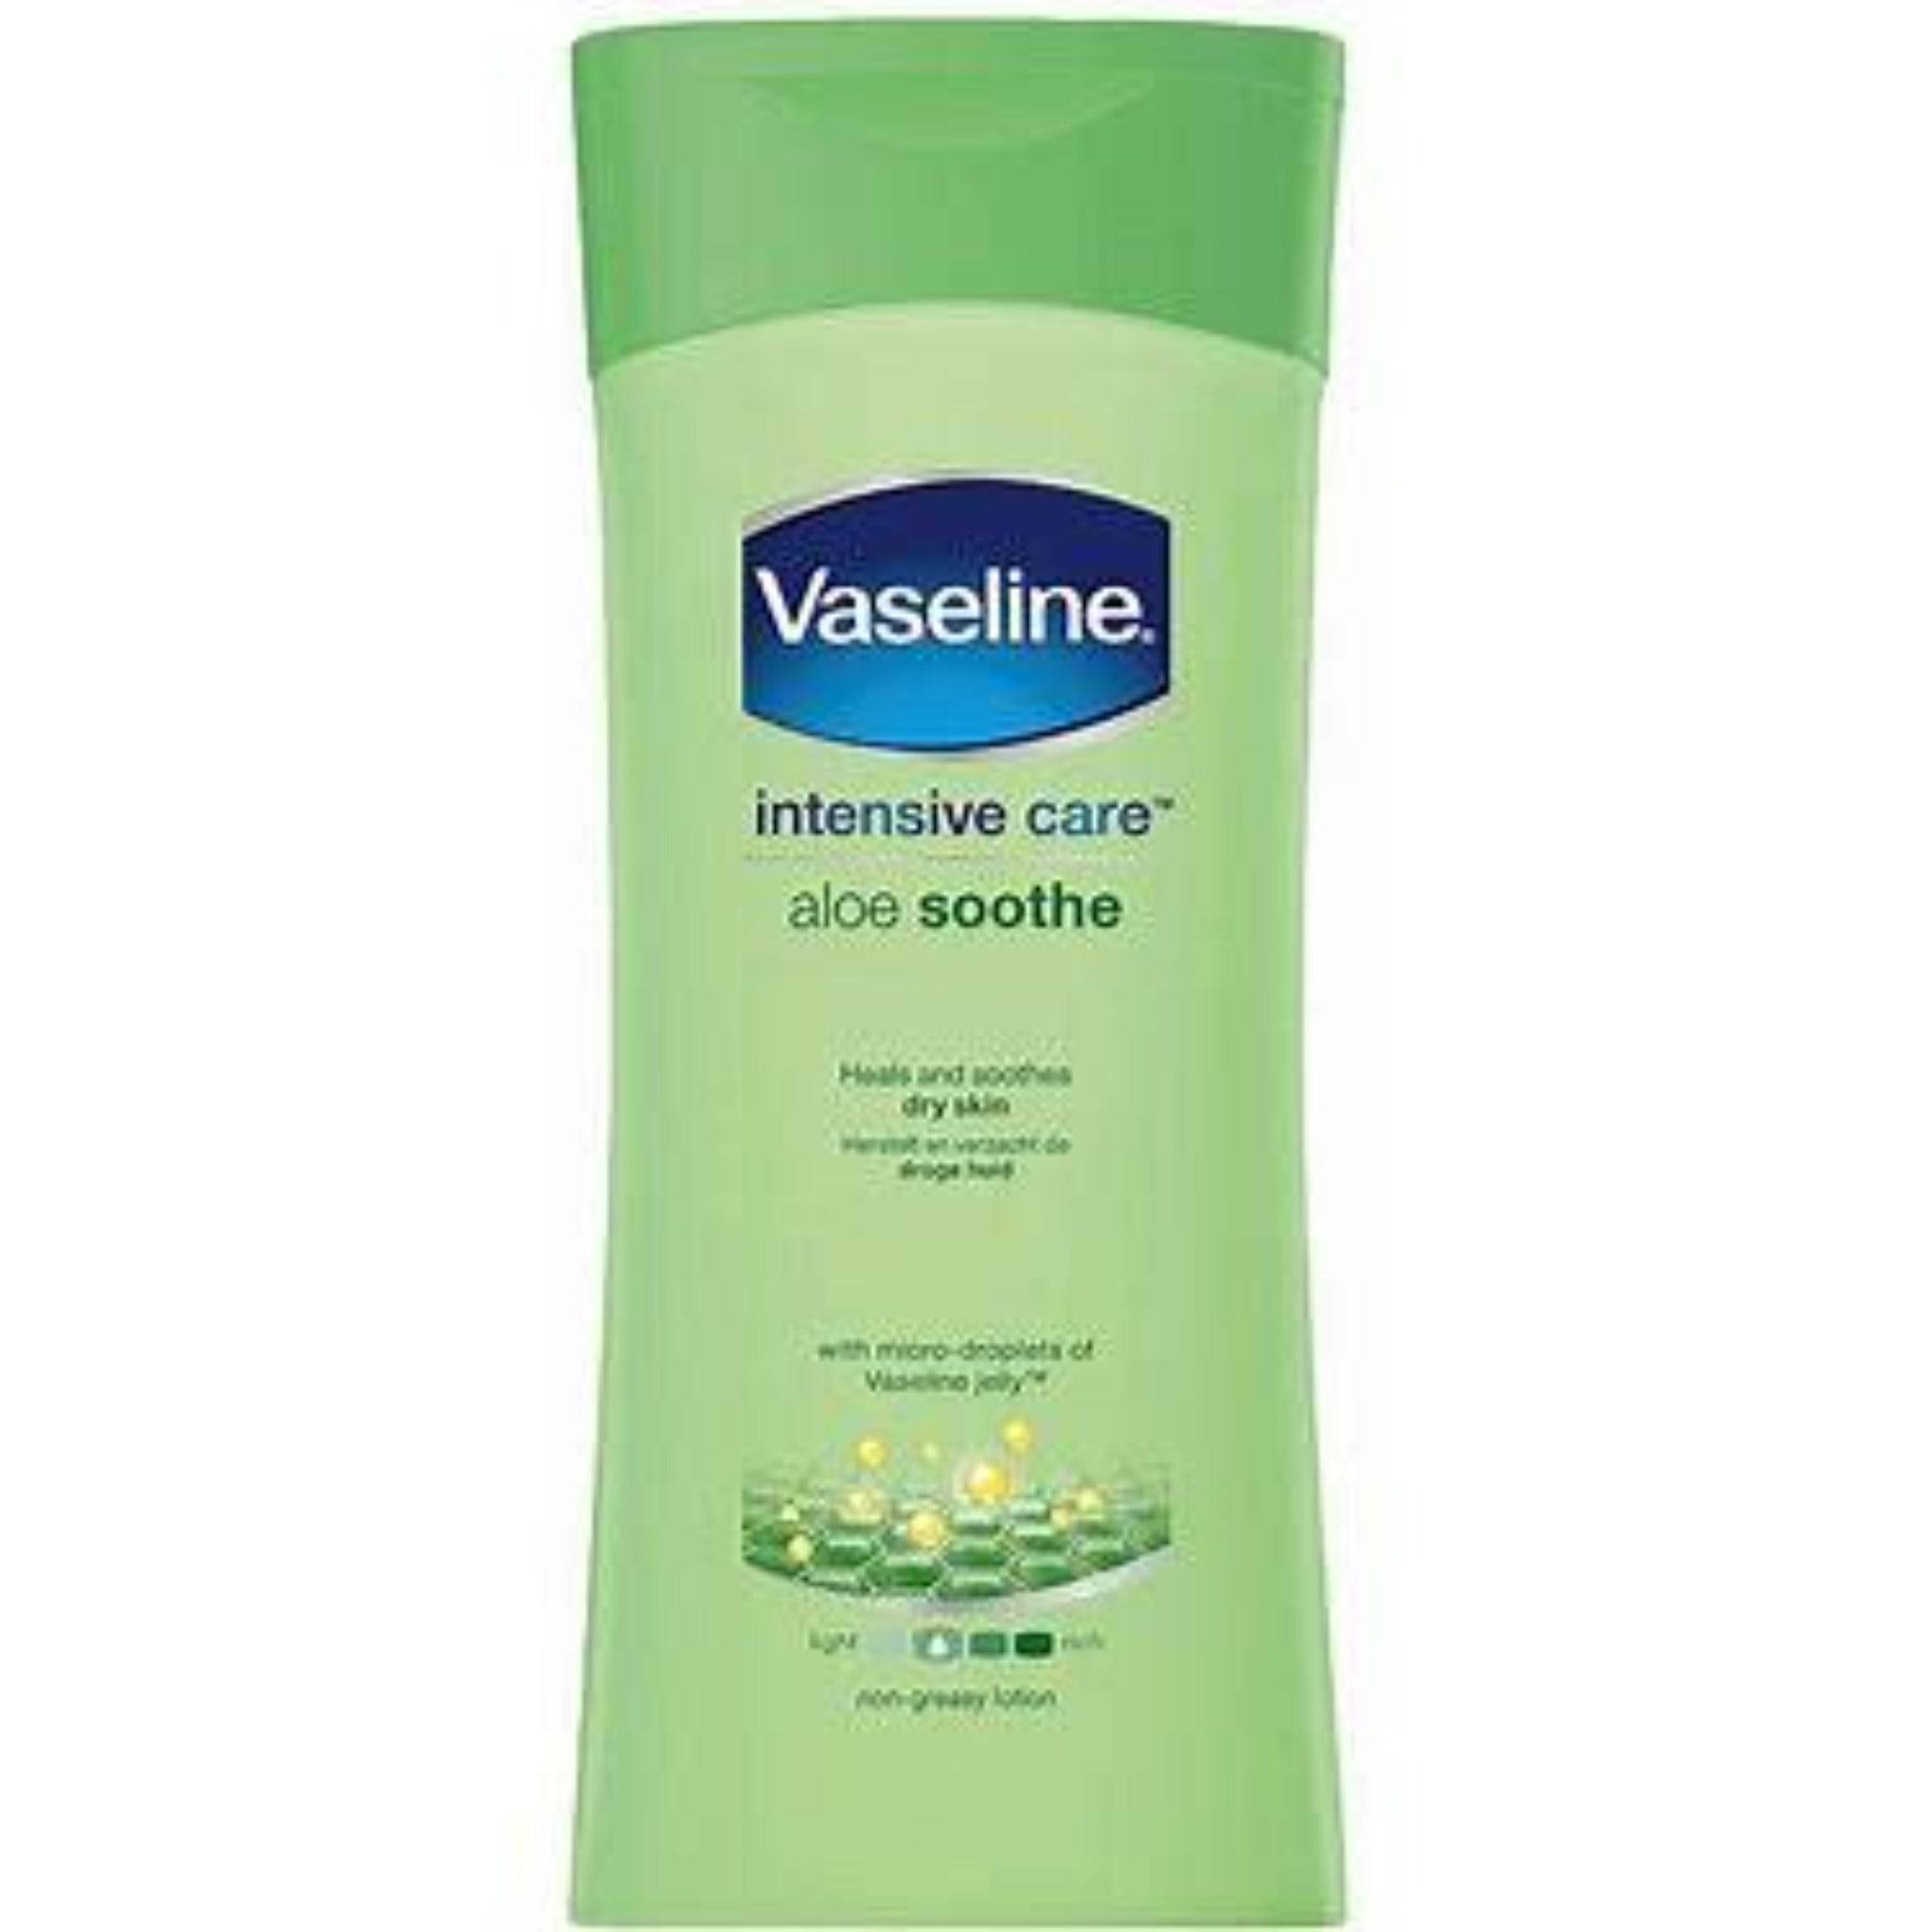 Vaseline Intensive Care Aloe Soothe Lotion - 400ml